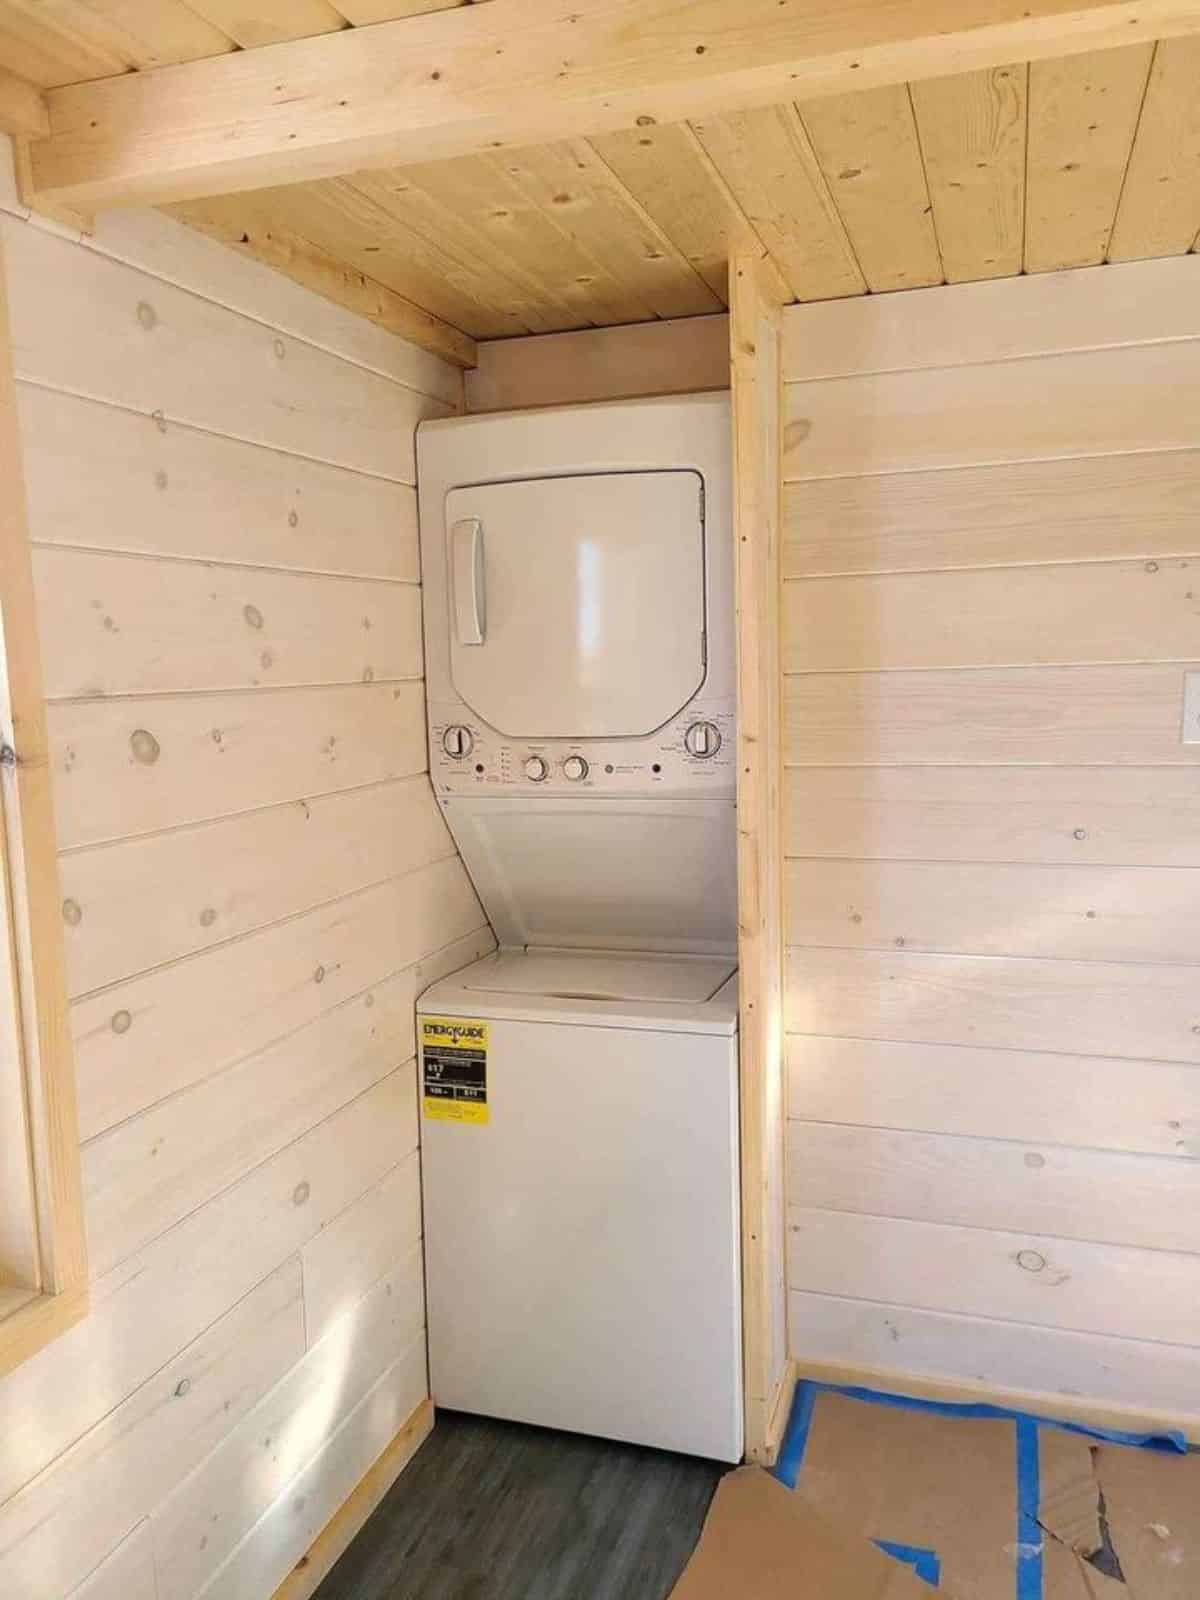 washer dryer combo is also included in bathroom